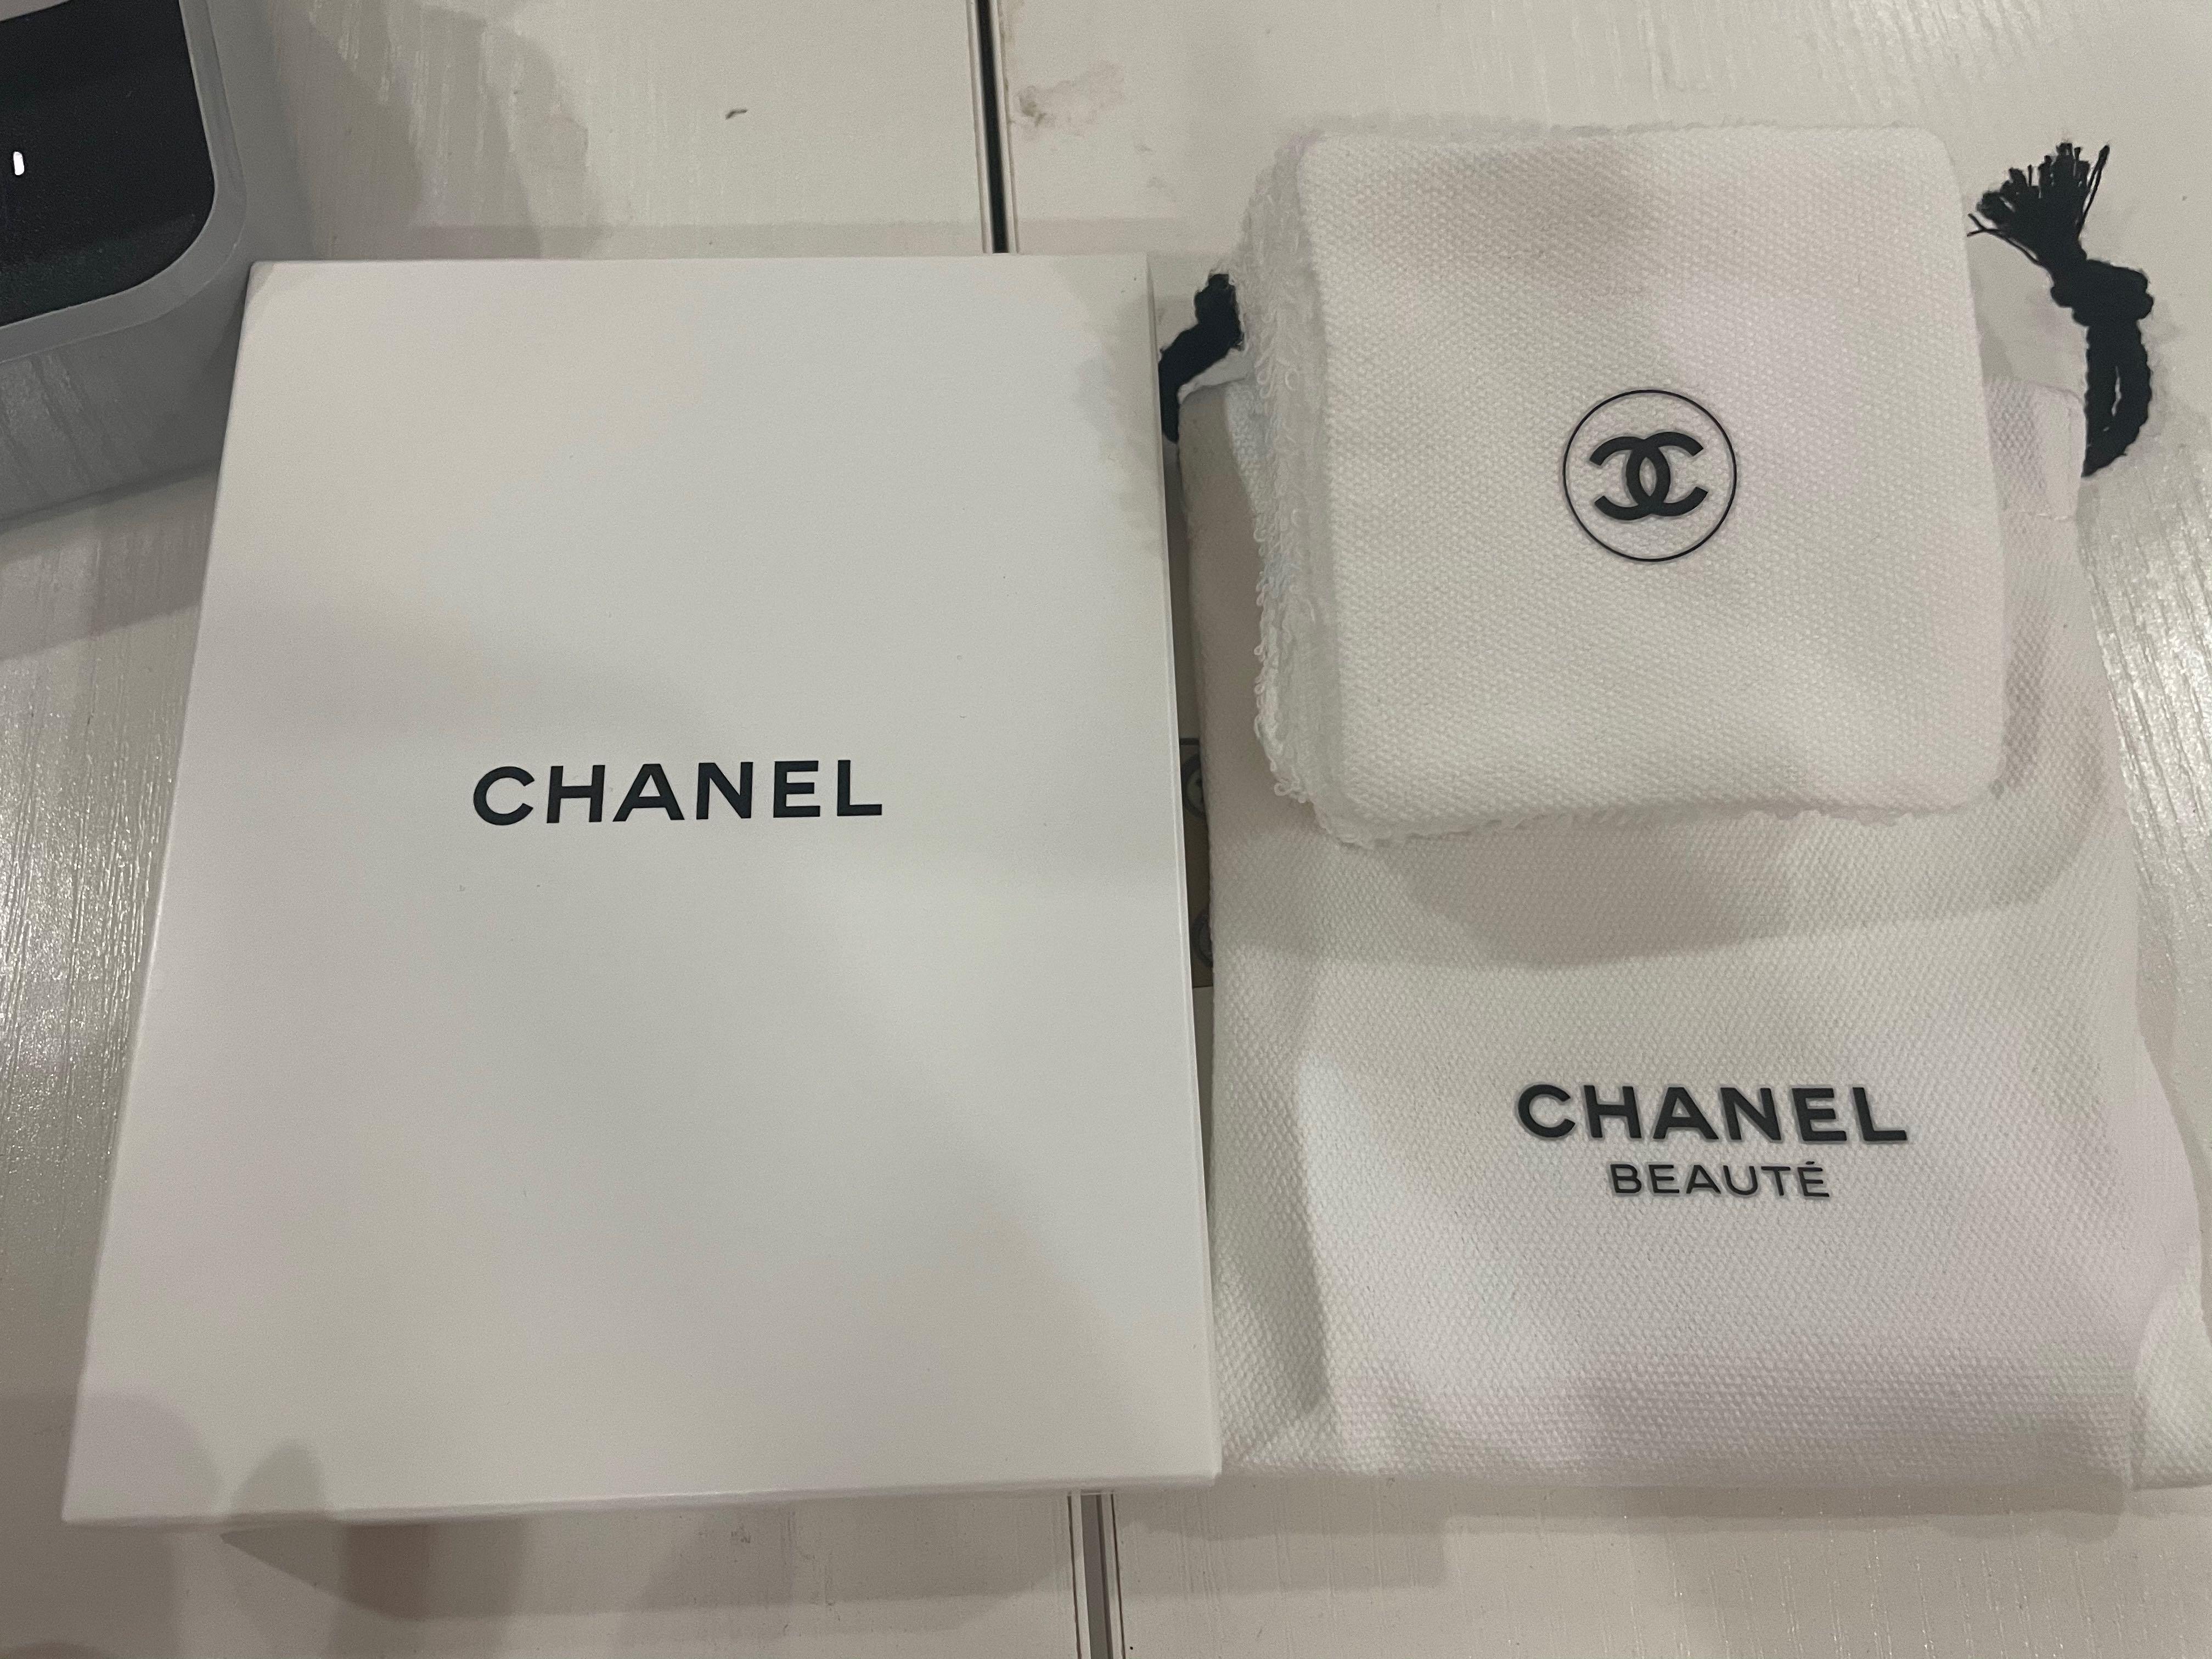 chanel cotton rounds